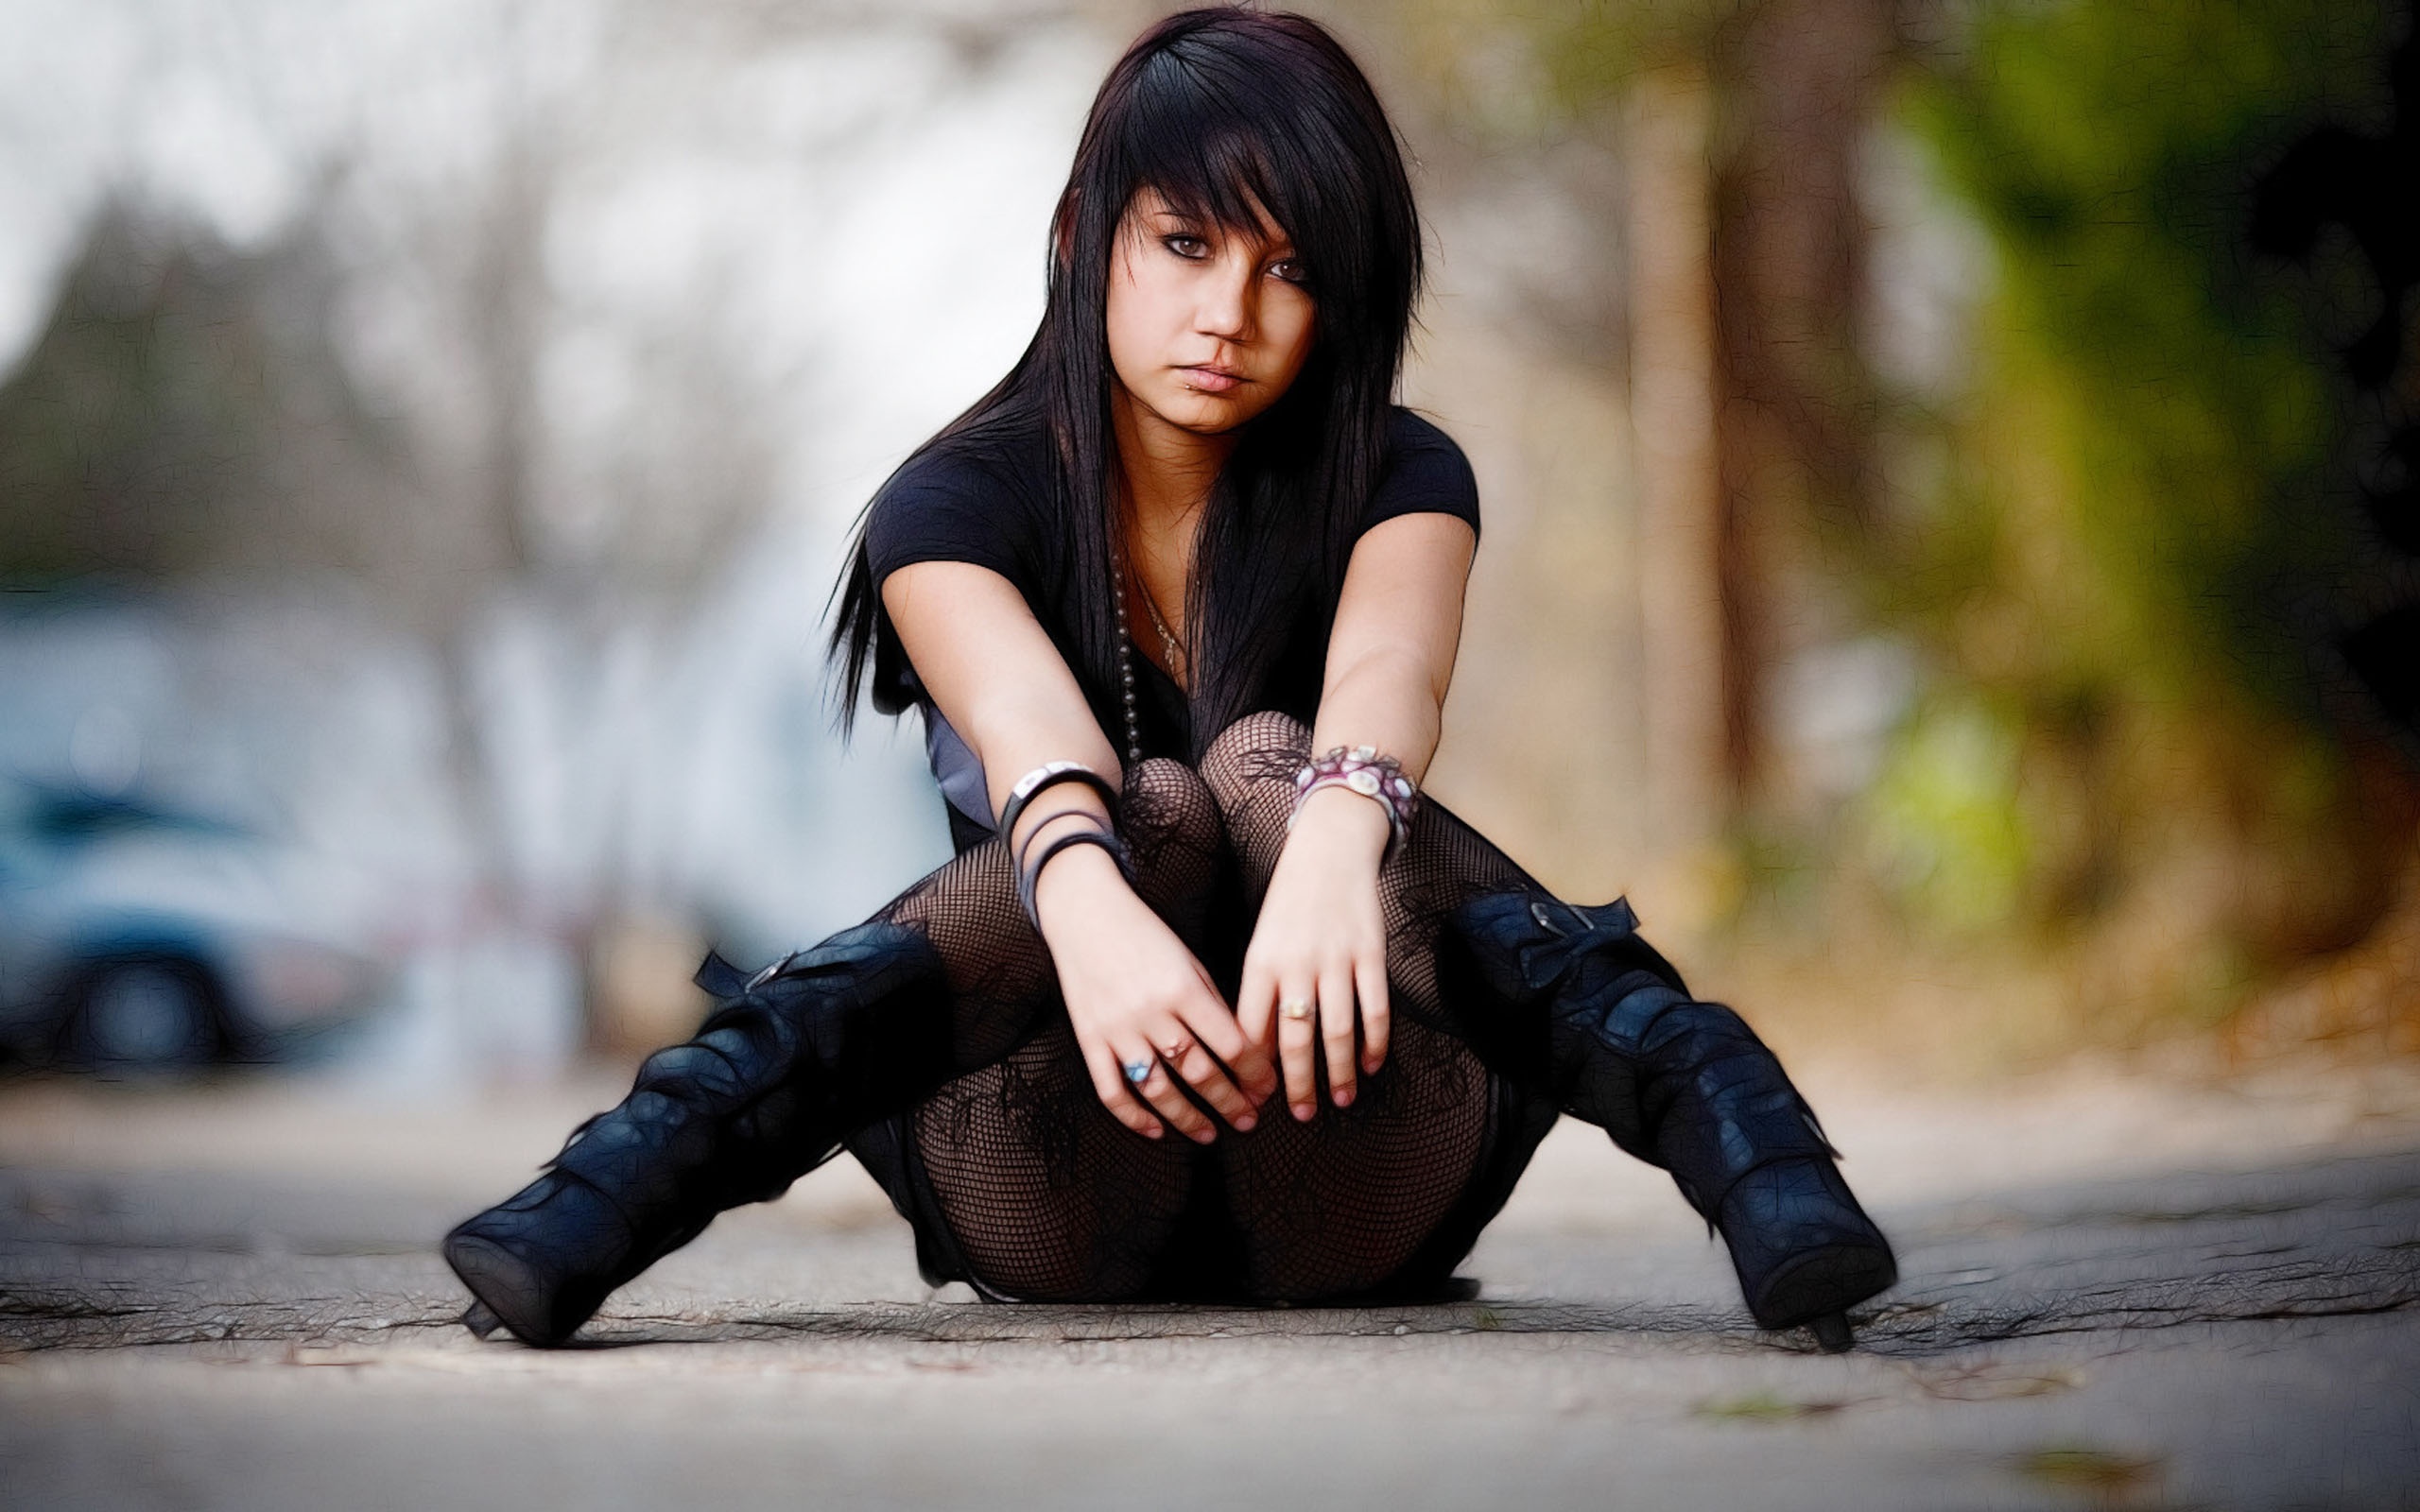 Clothes For Girls Wallpaper Gothic Background